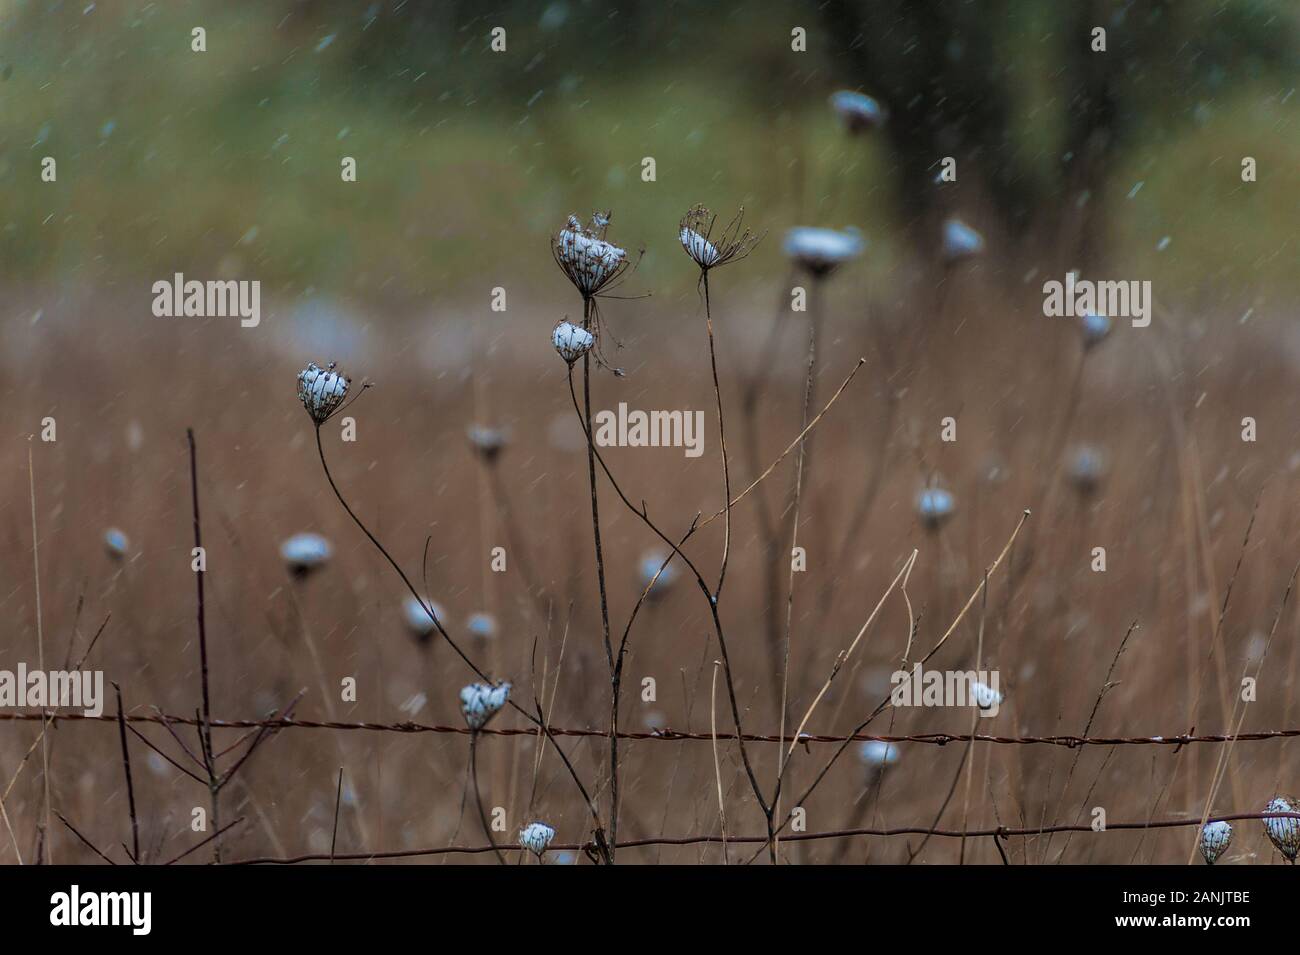 Falling snow gathers in spent brittle flower pods along a barbed wire fence. Stock Photo